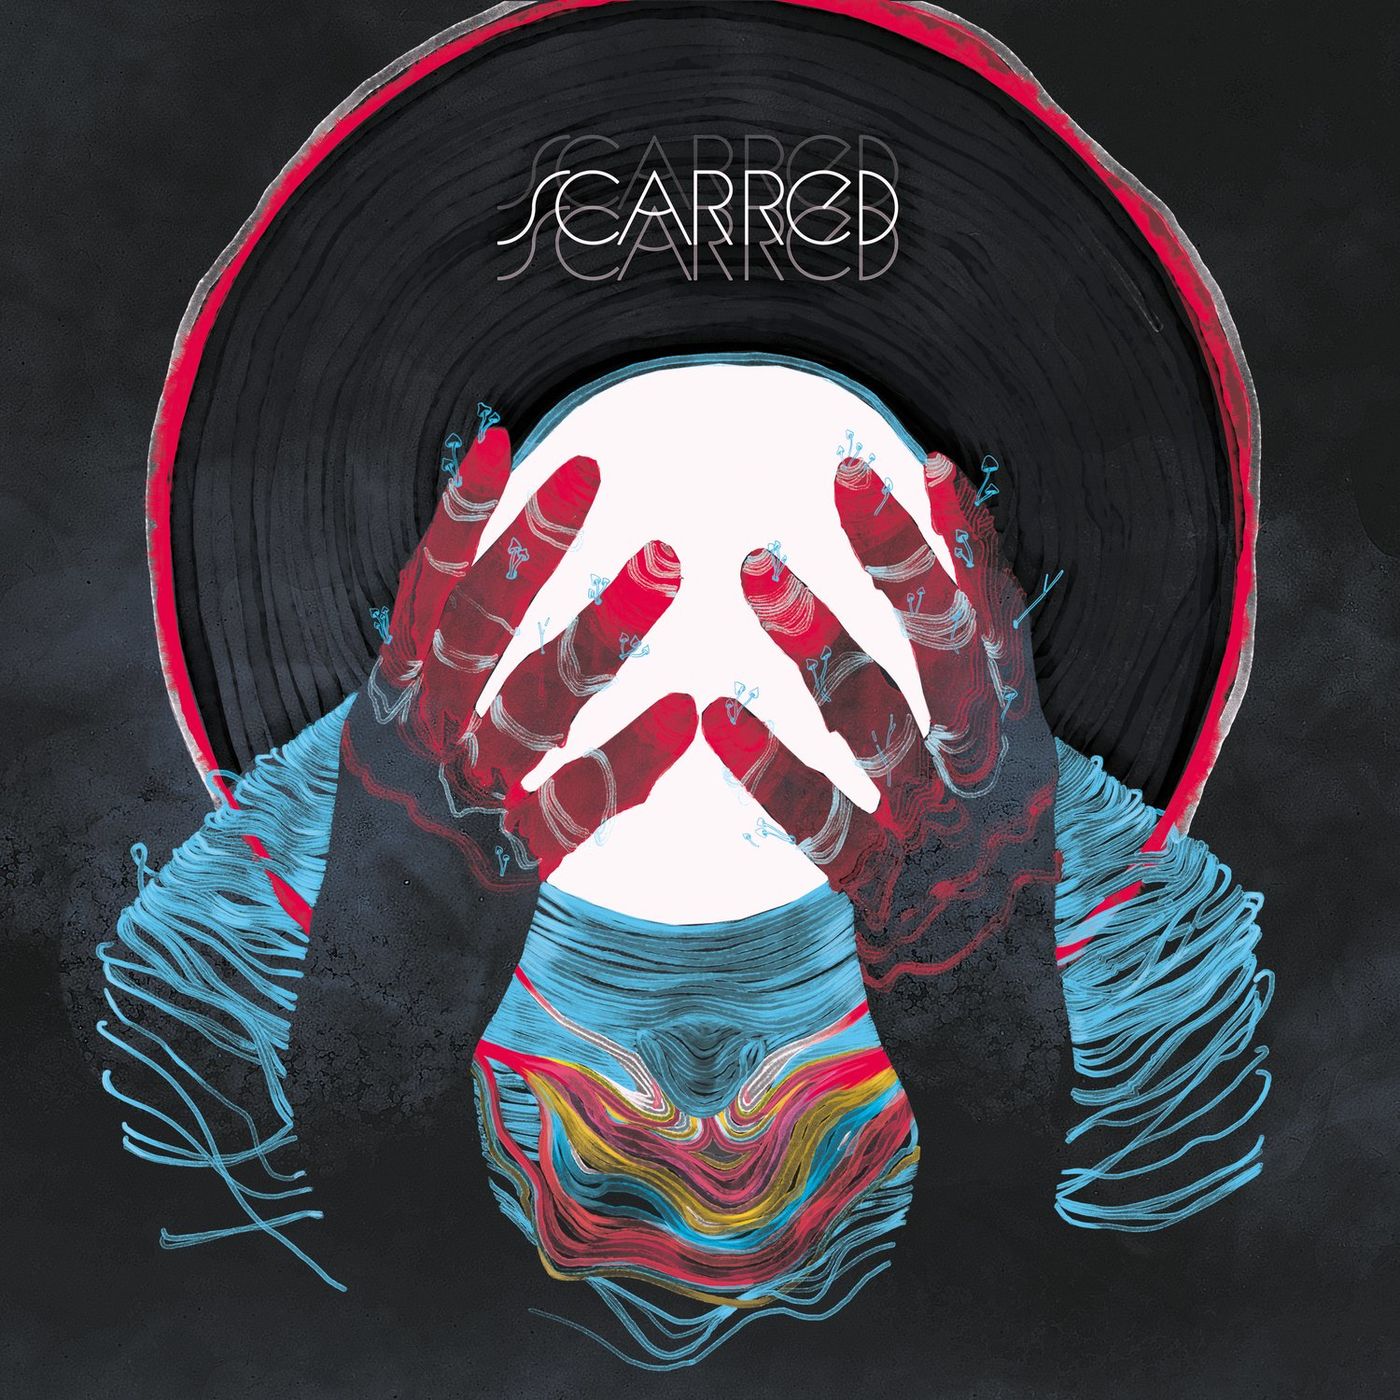 SCARRED - Scarred cover 